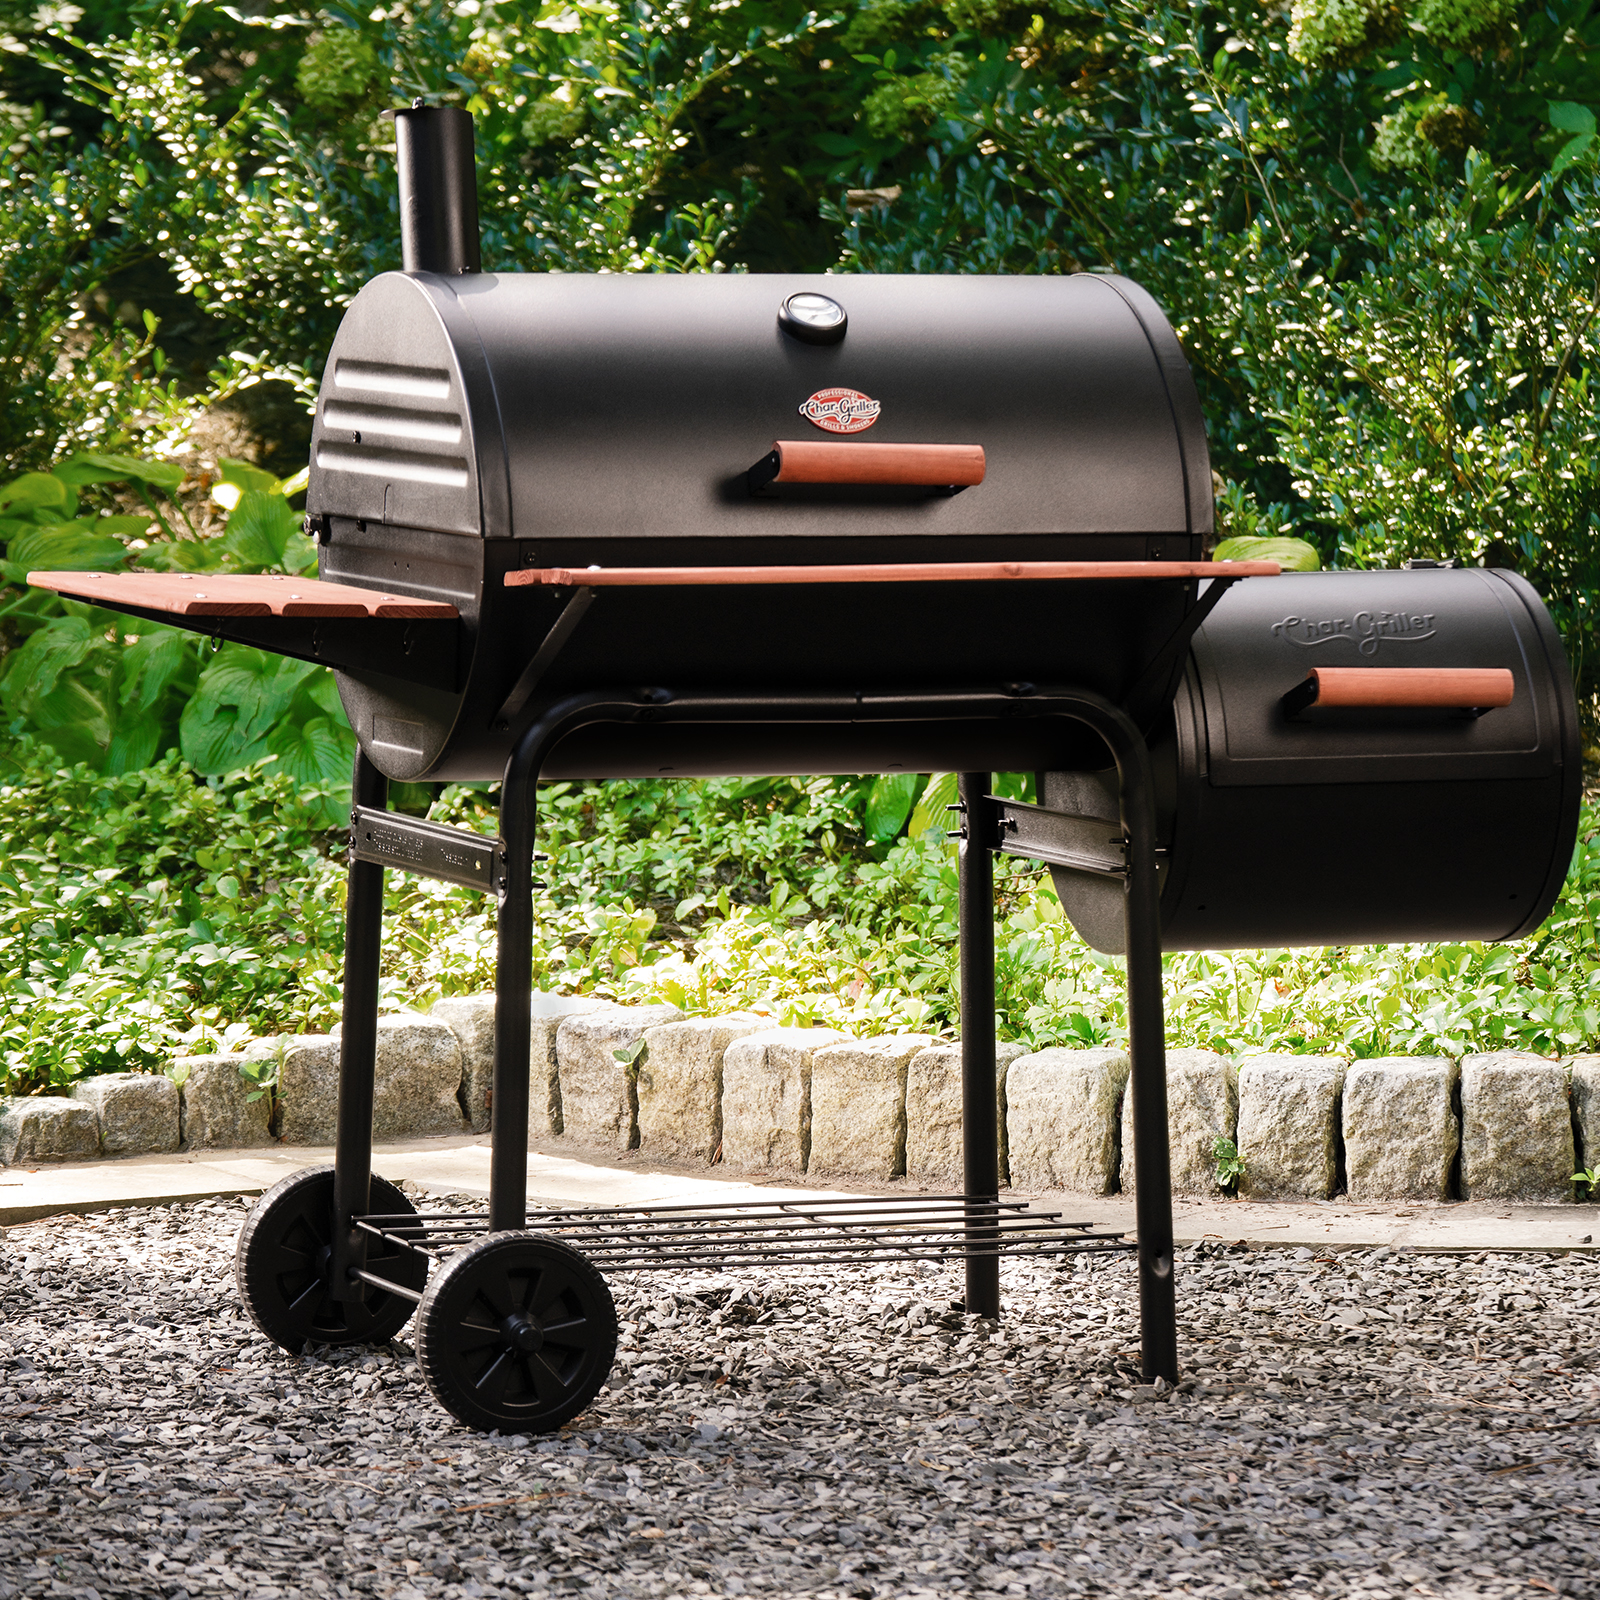 Char-Griller Smokin Pro 28" Charcoal Grill with Heat Diffuser - image 5 of 13